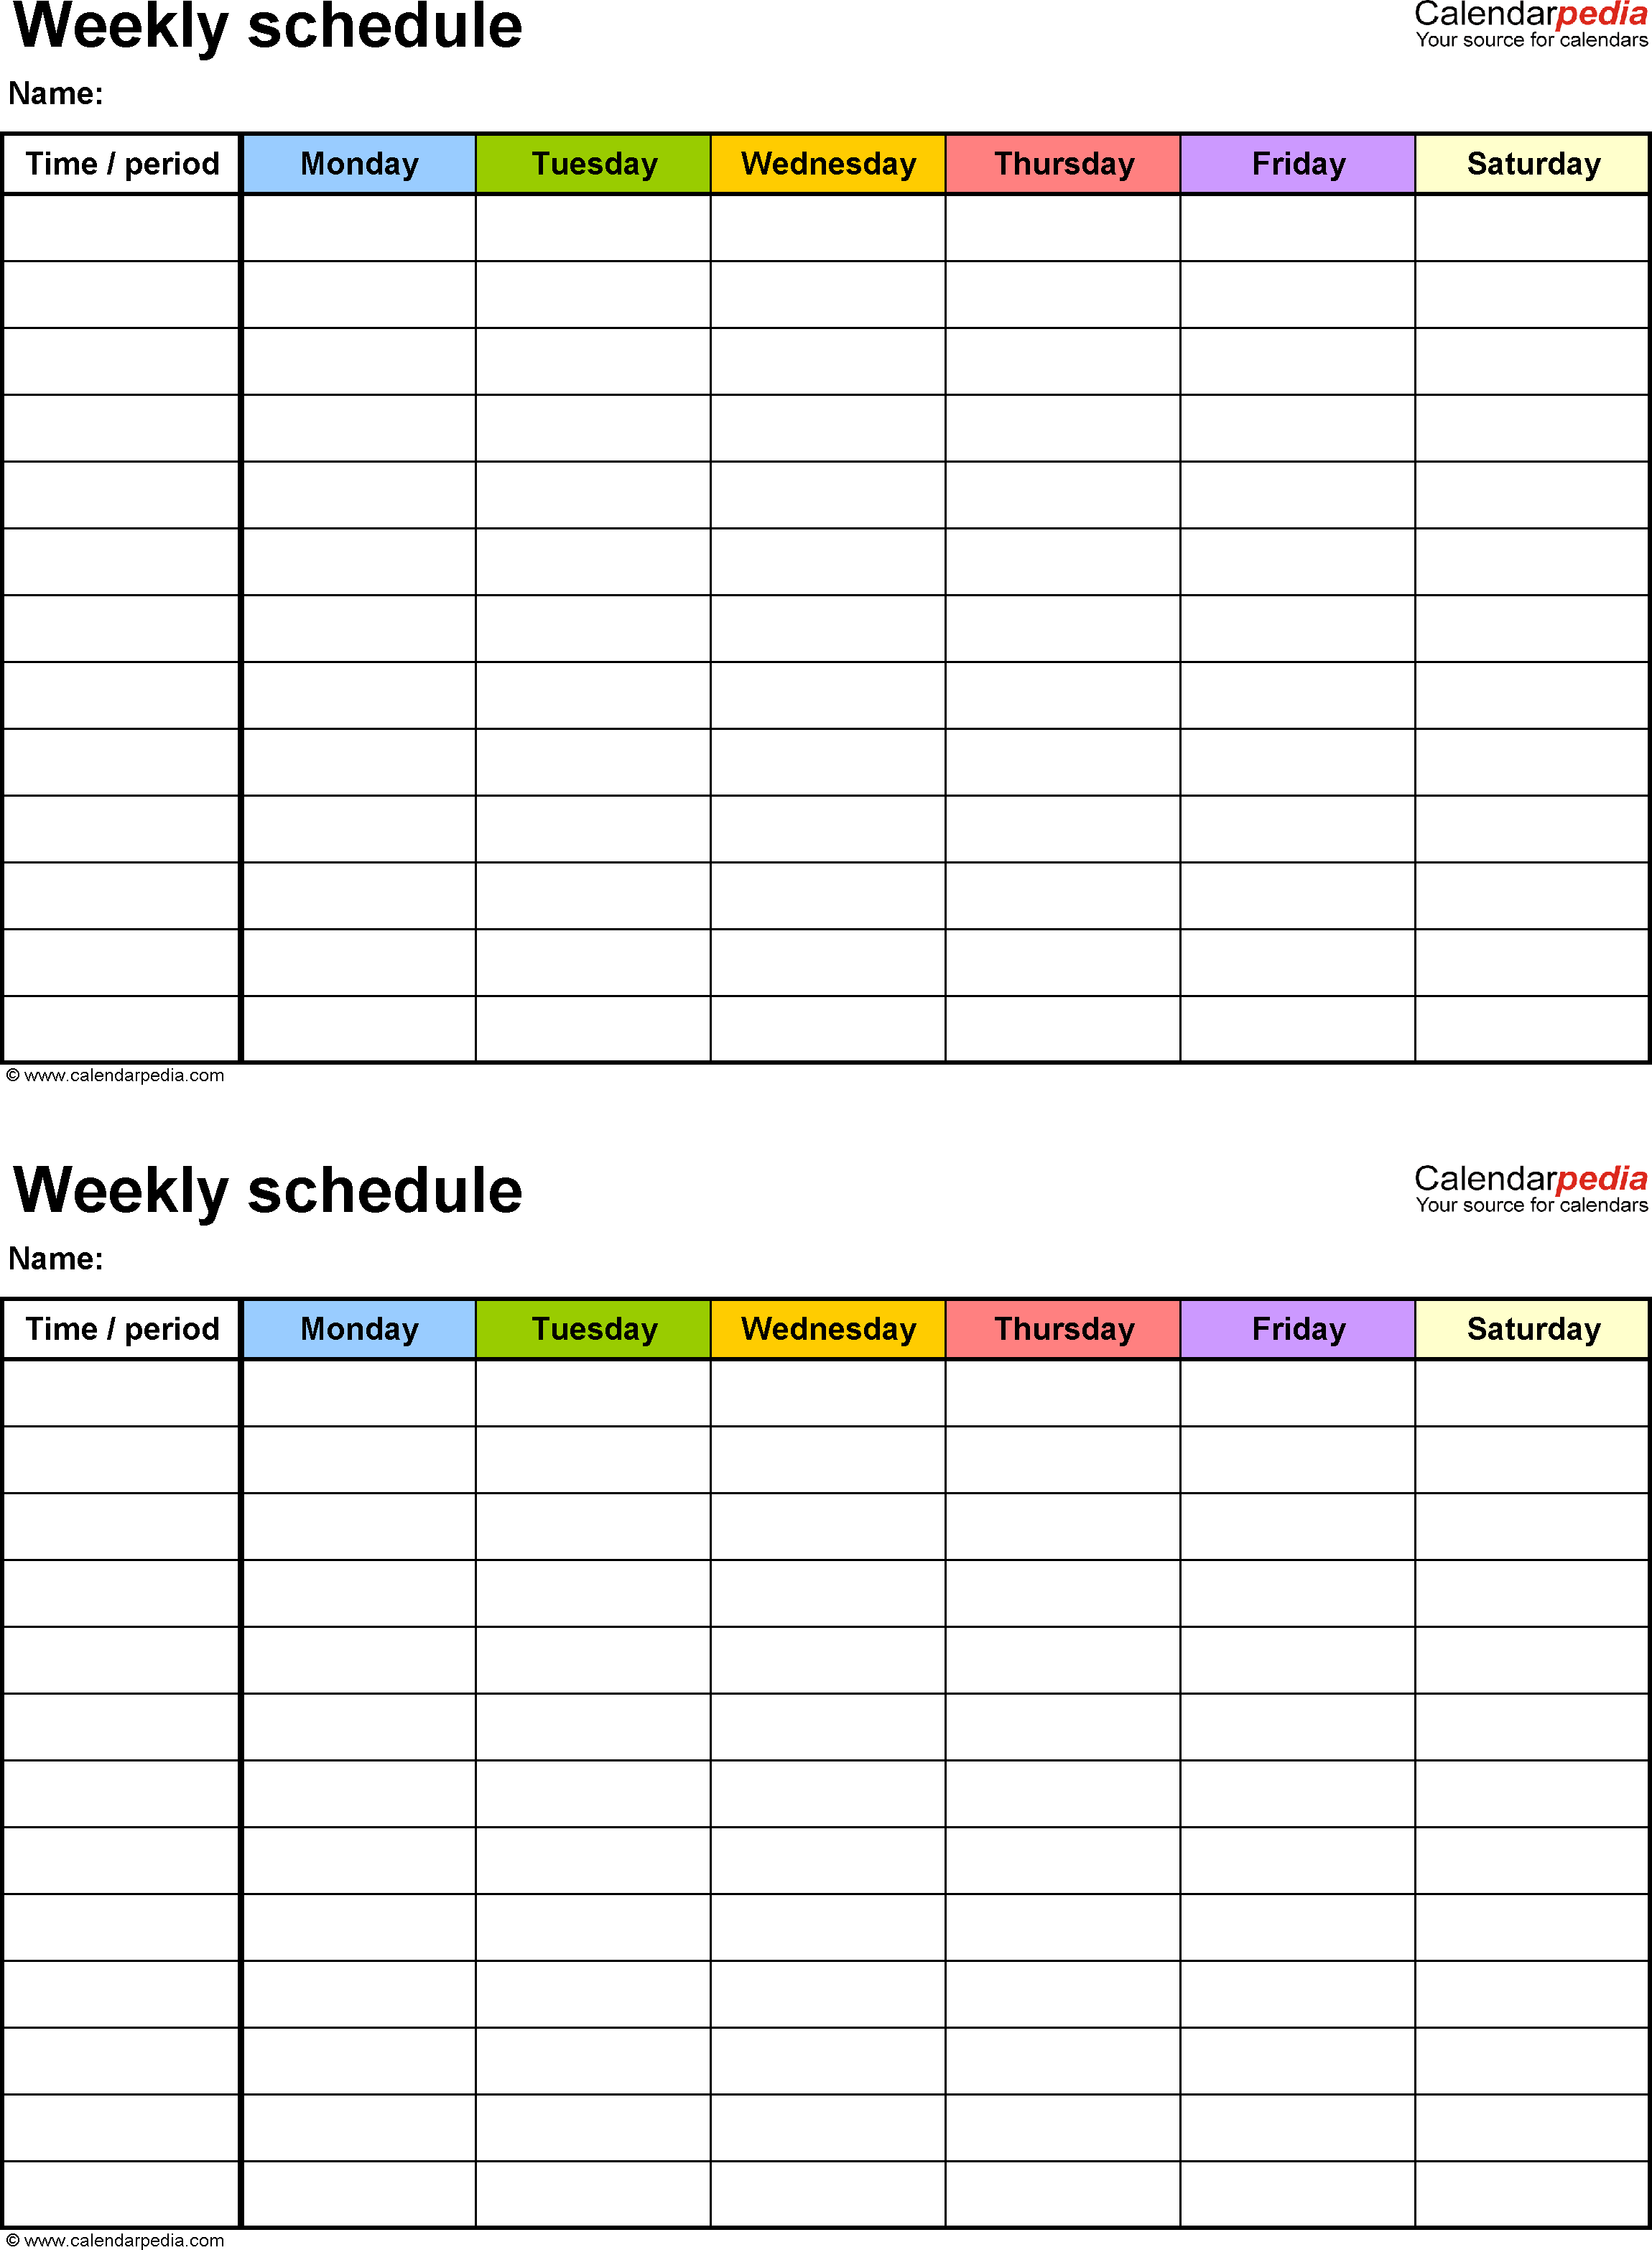 62 Customize Our Free School Schedule Template Xls Templates with School Schedule Template Xls